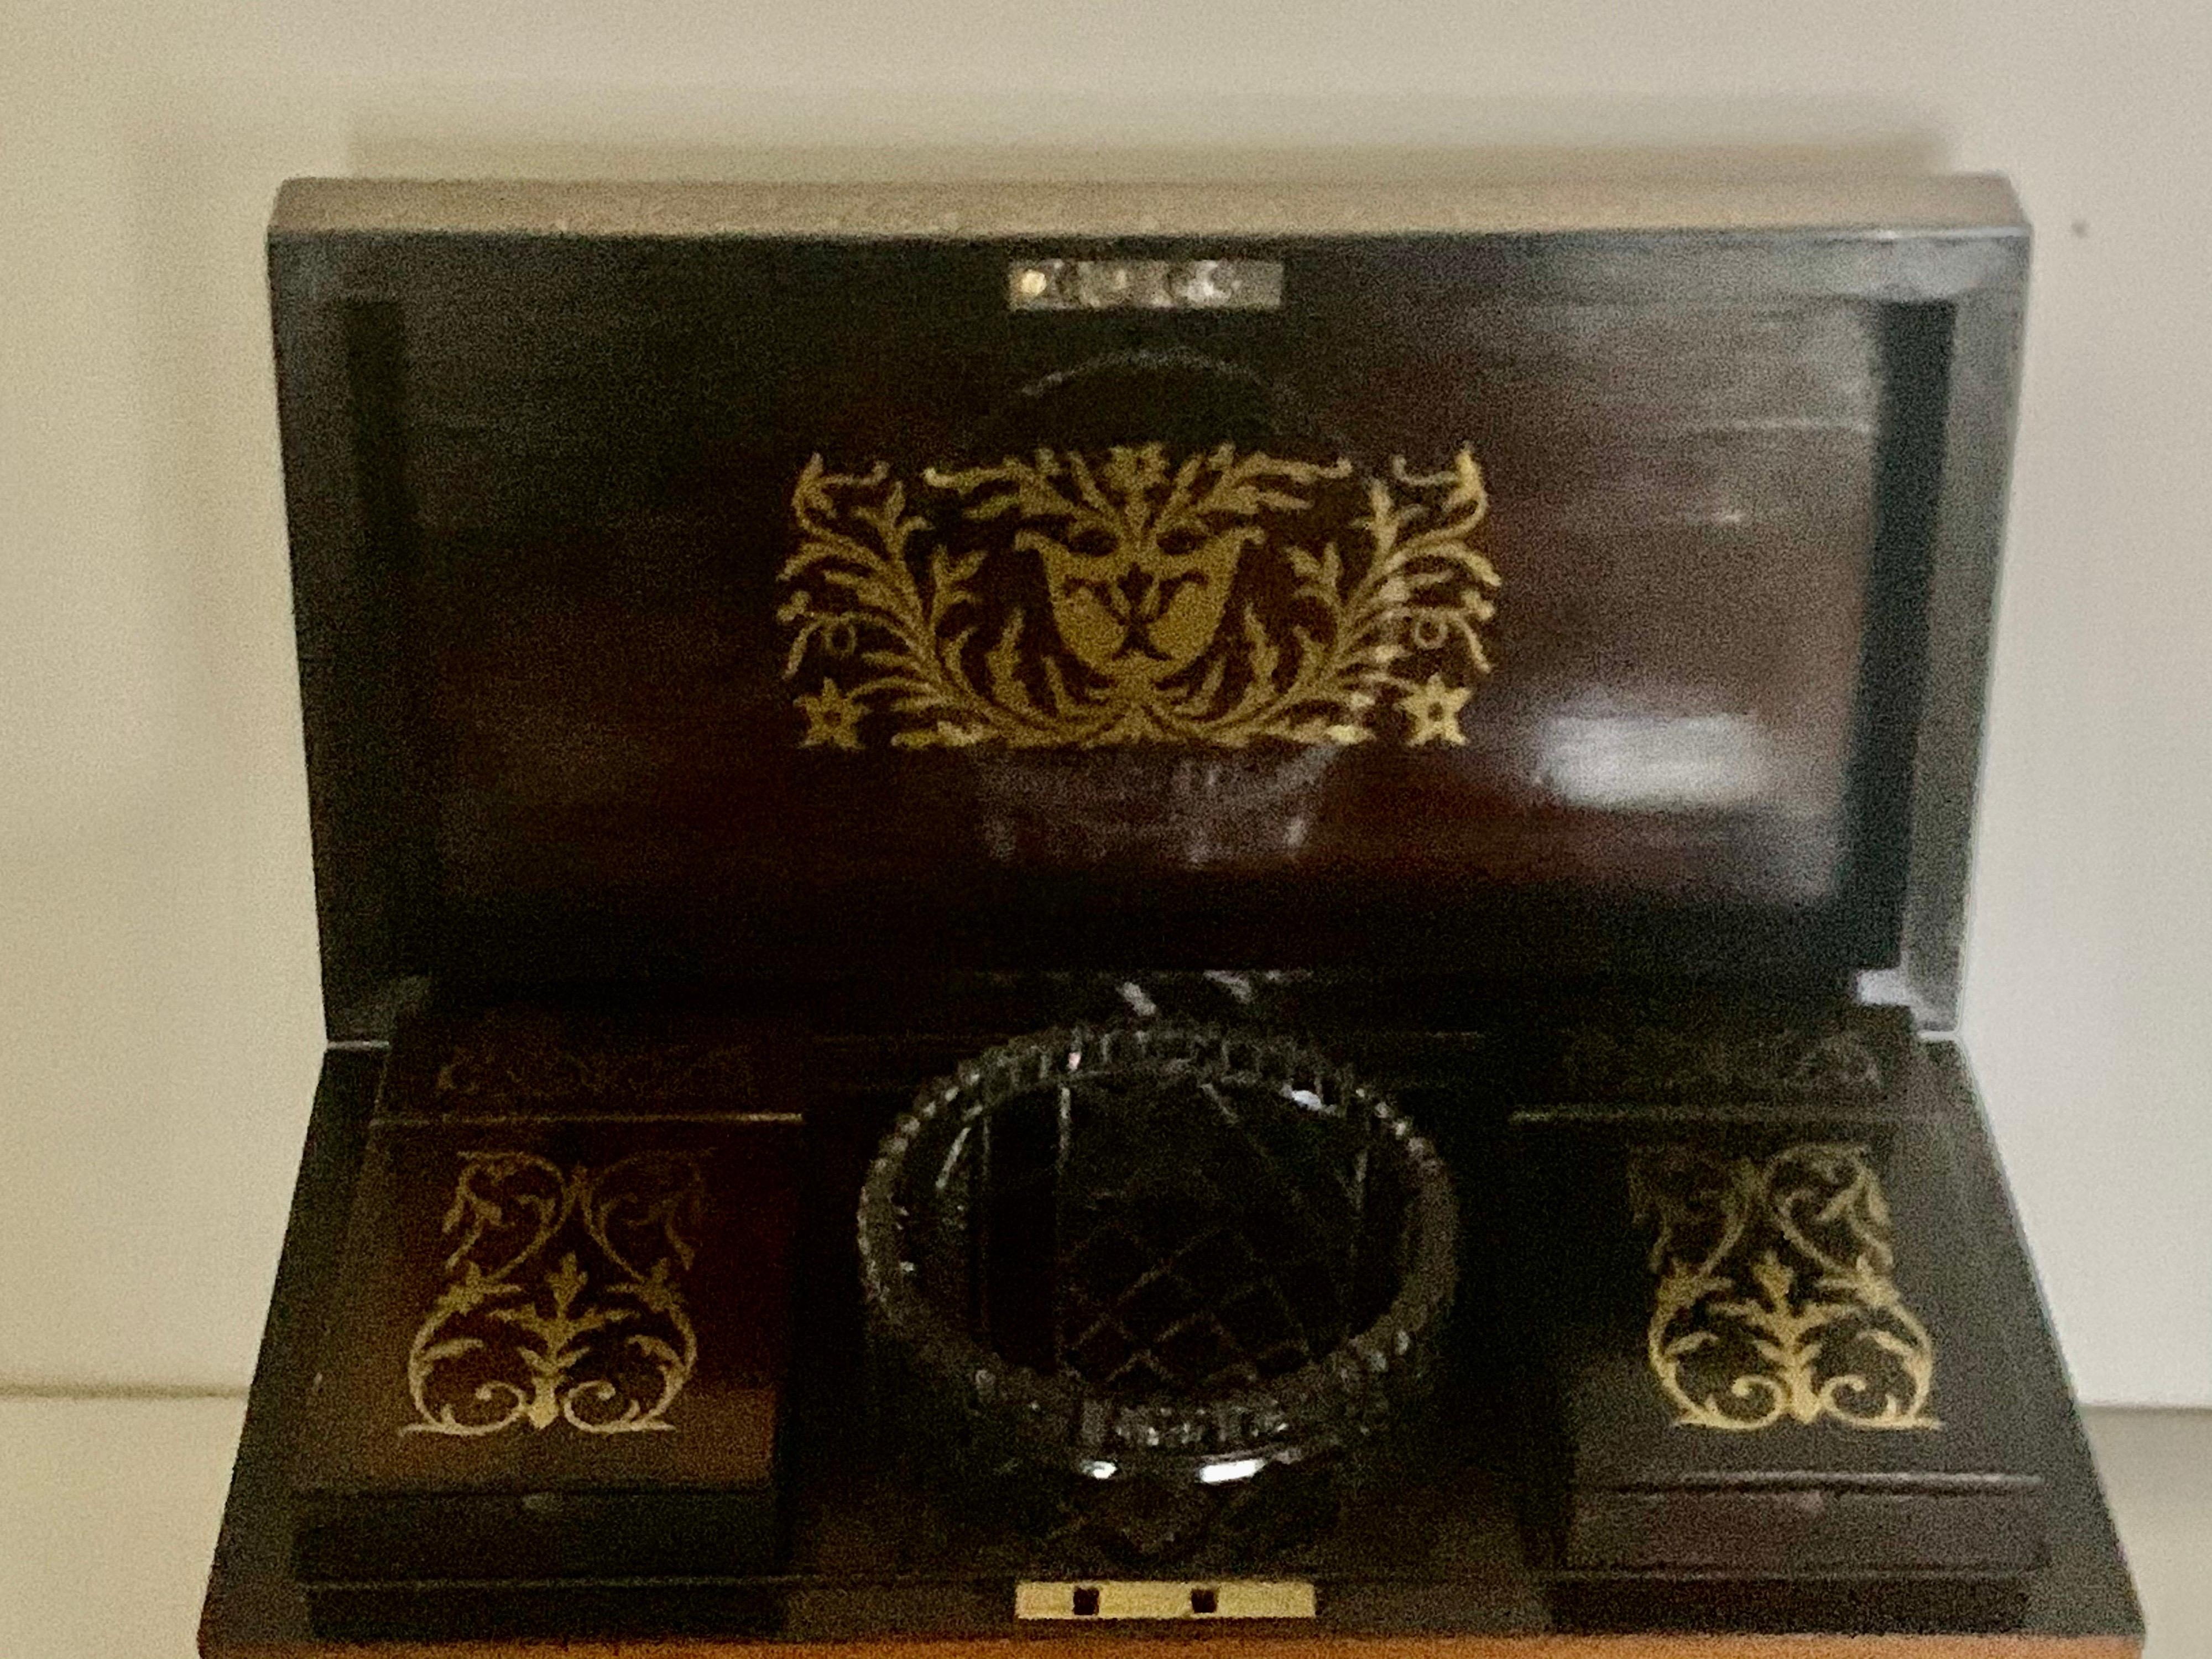 A fine regency brass inlaid rosewood twin canister tea caddy.
A lovely quality sarcophagus regency rosewood tea caddy dating to 1820, inlaid with a beautiful brass Foliate design to the top and front of the box. This fine tea caddy sits on four